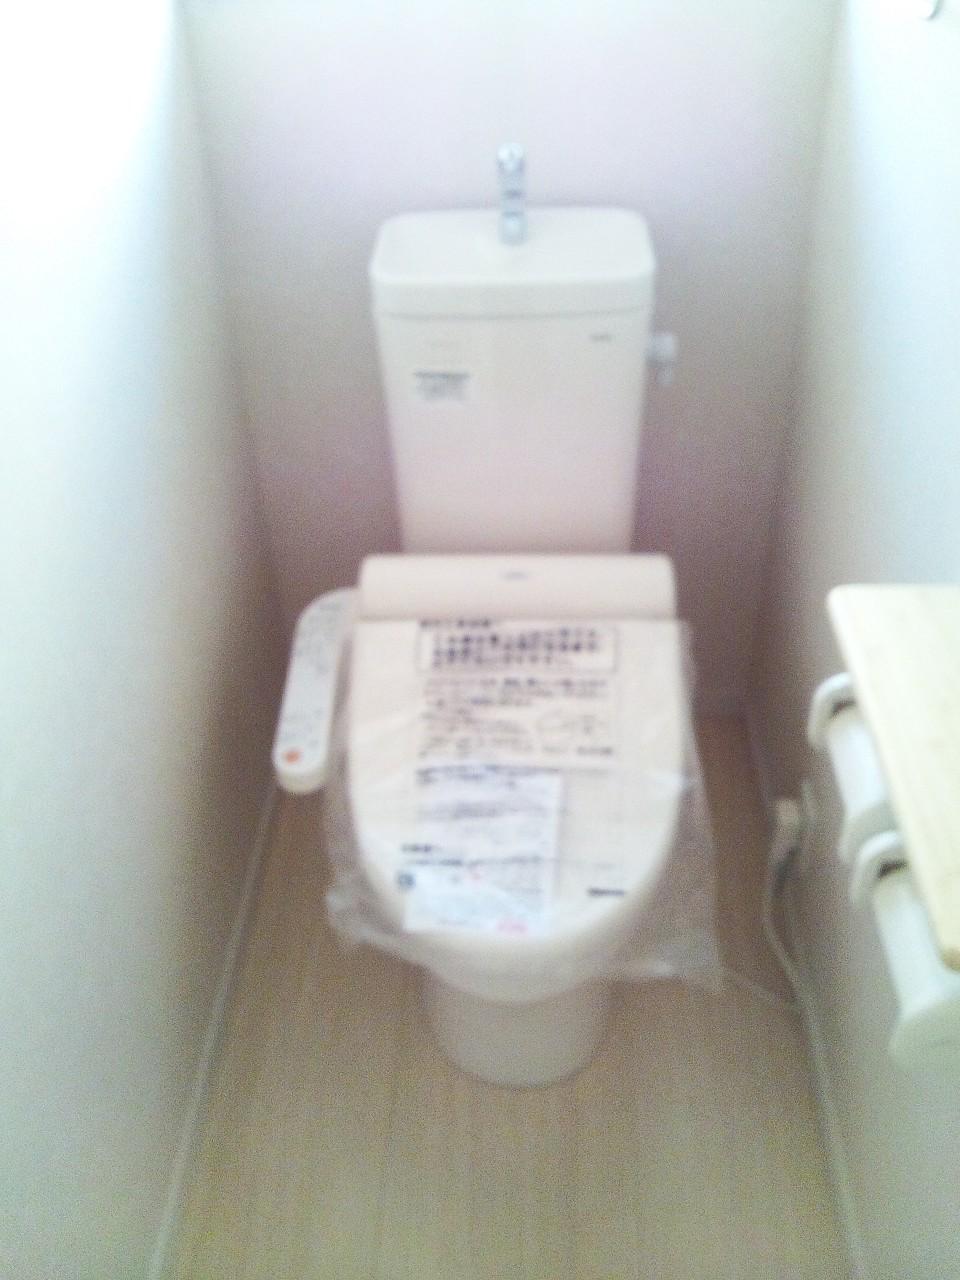 Toilet. 1 Building Bidet with function